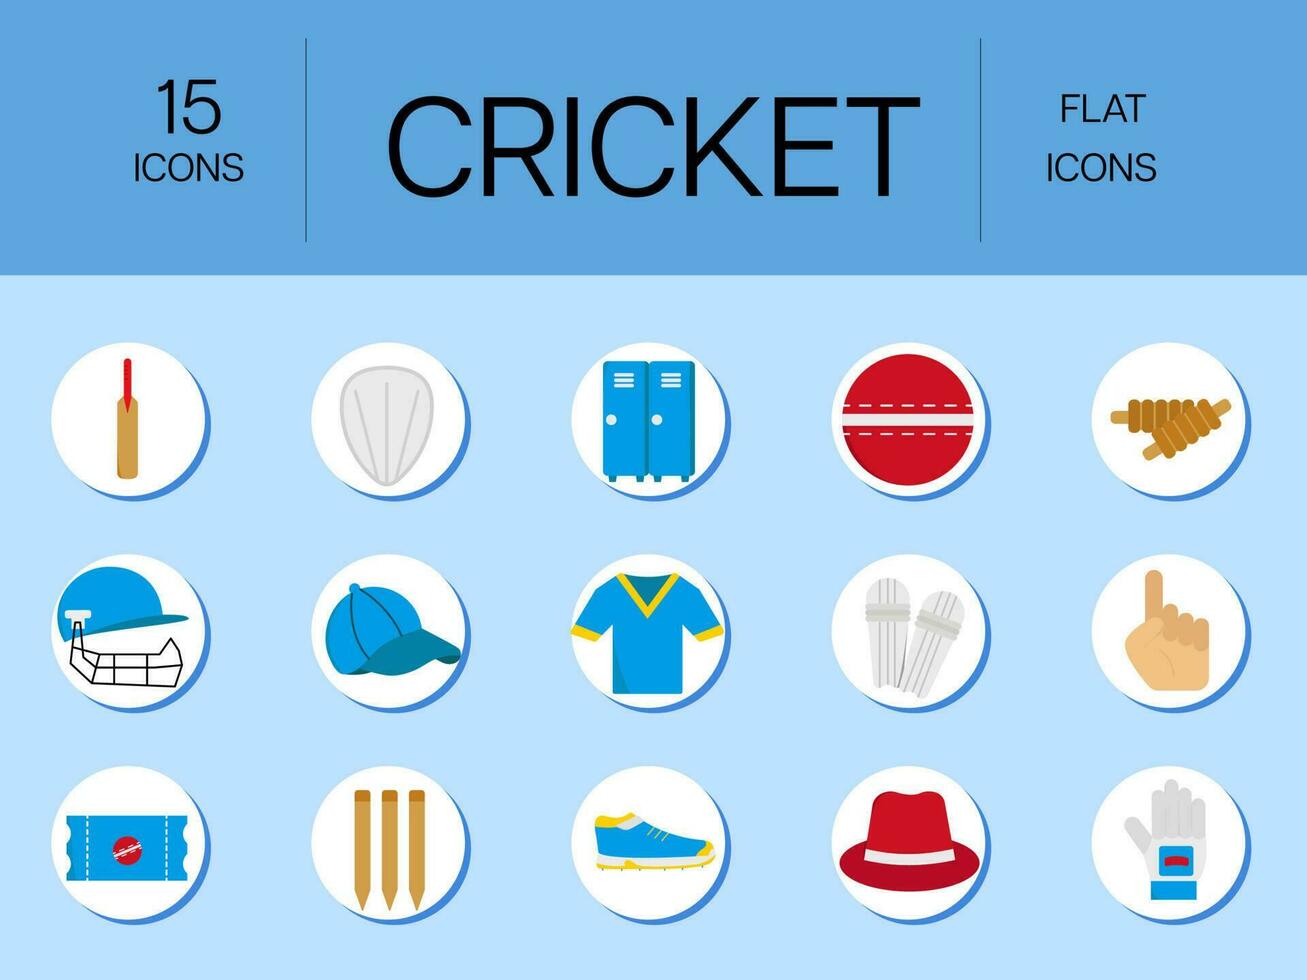 15 Icons Pack Of Cricket Essential Object Over Circle On Blue Background. vector